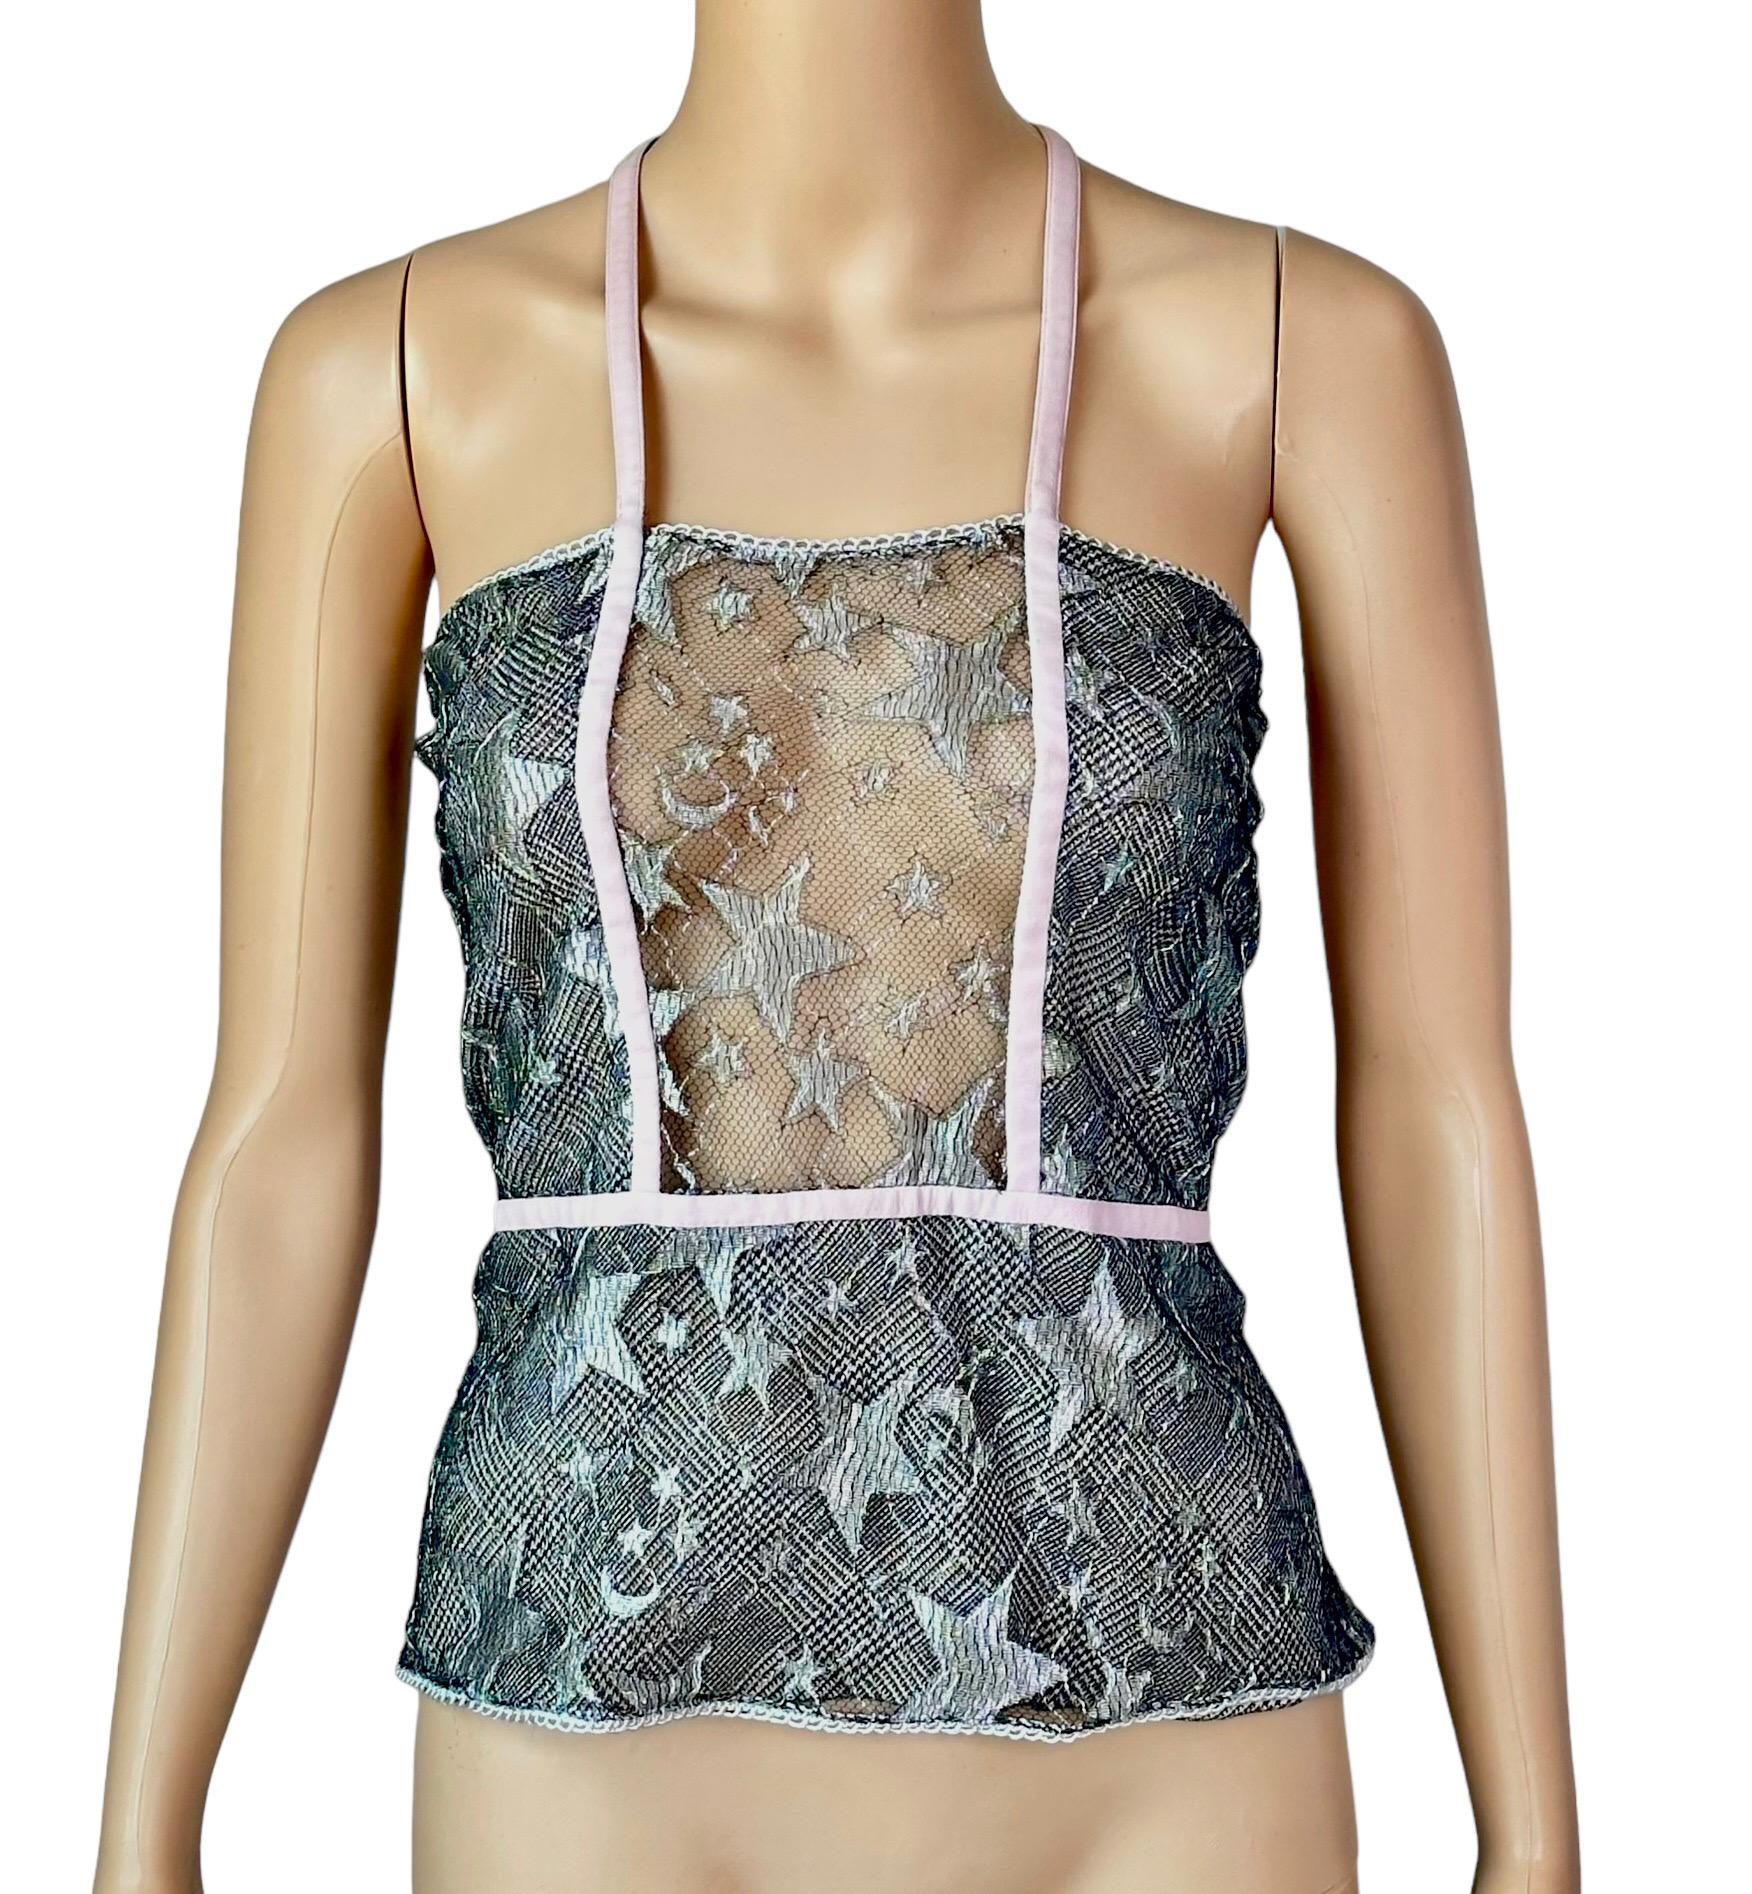 Gianni Versace S/S 1998 Runway Sheer Lace Star Wrap Top  For Sale 4